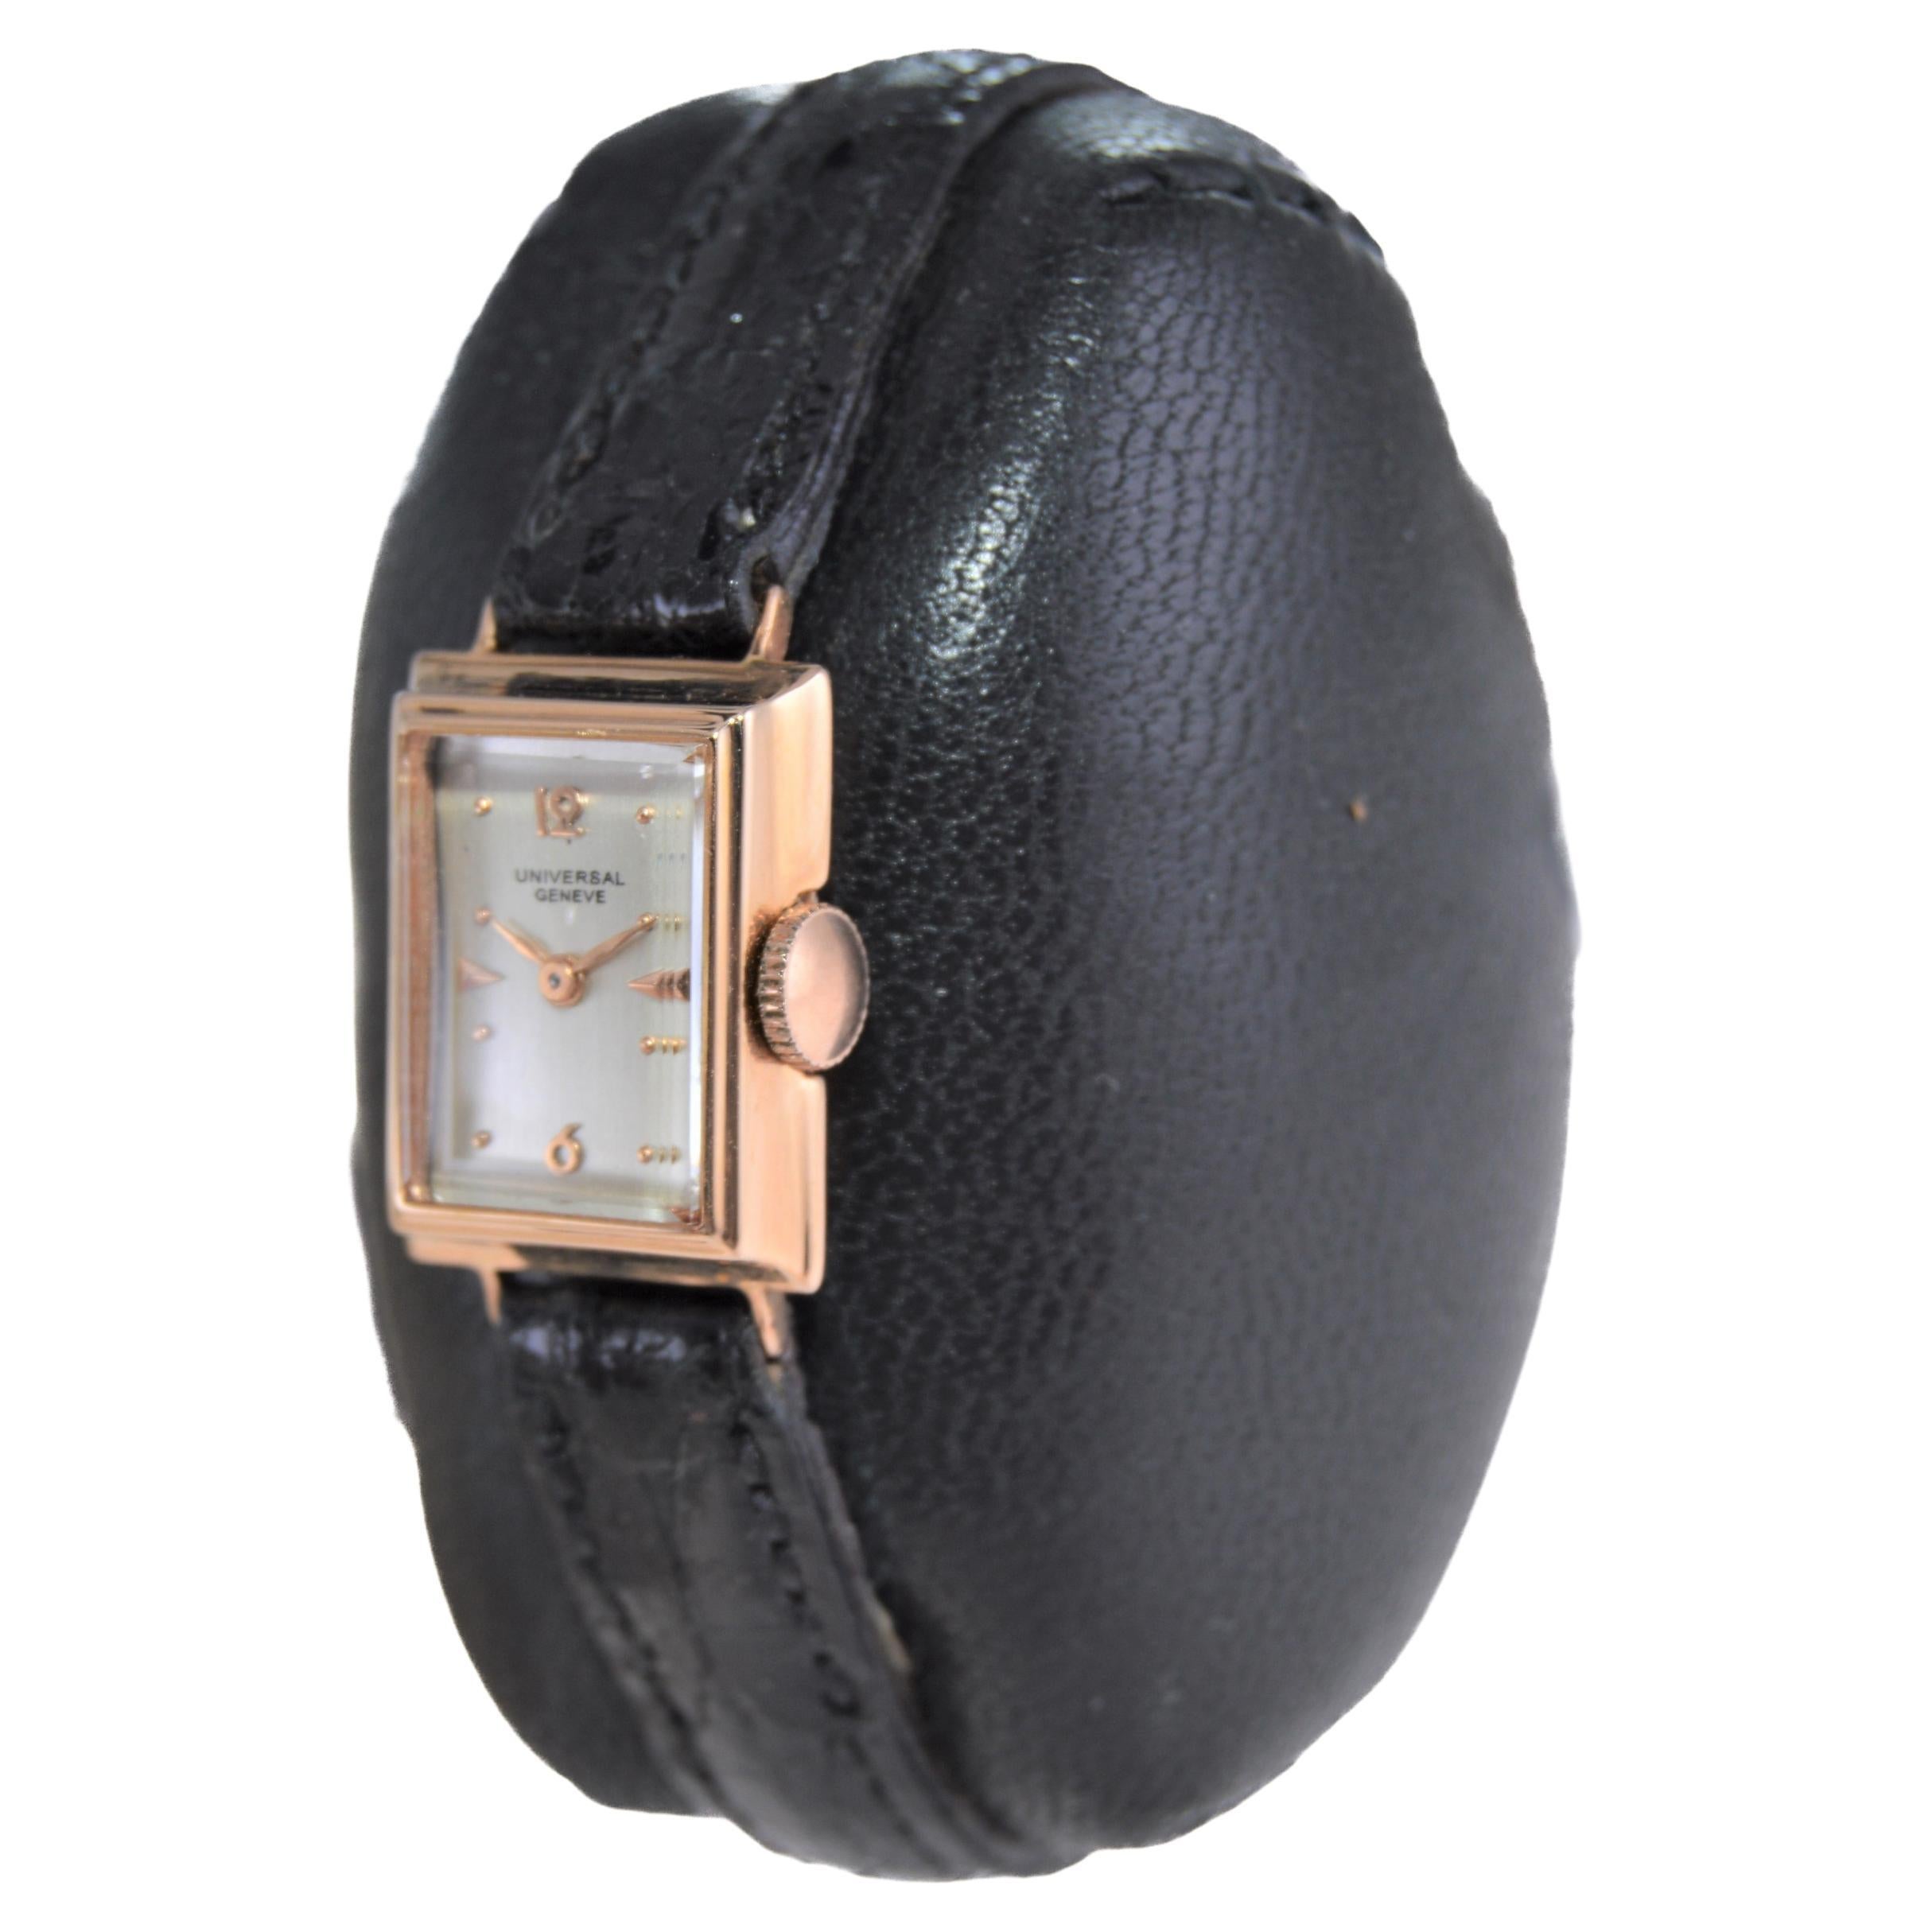 Universal Geneve 18Kt. Rose Gold Art Deco Ladies Watch circa 1940's In Excellent Condition For Sale In Long Beach, CA